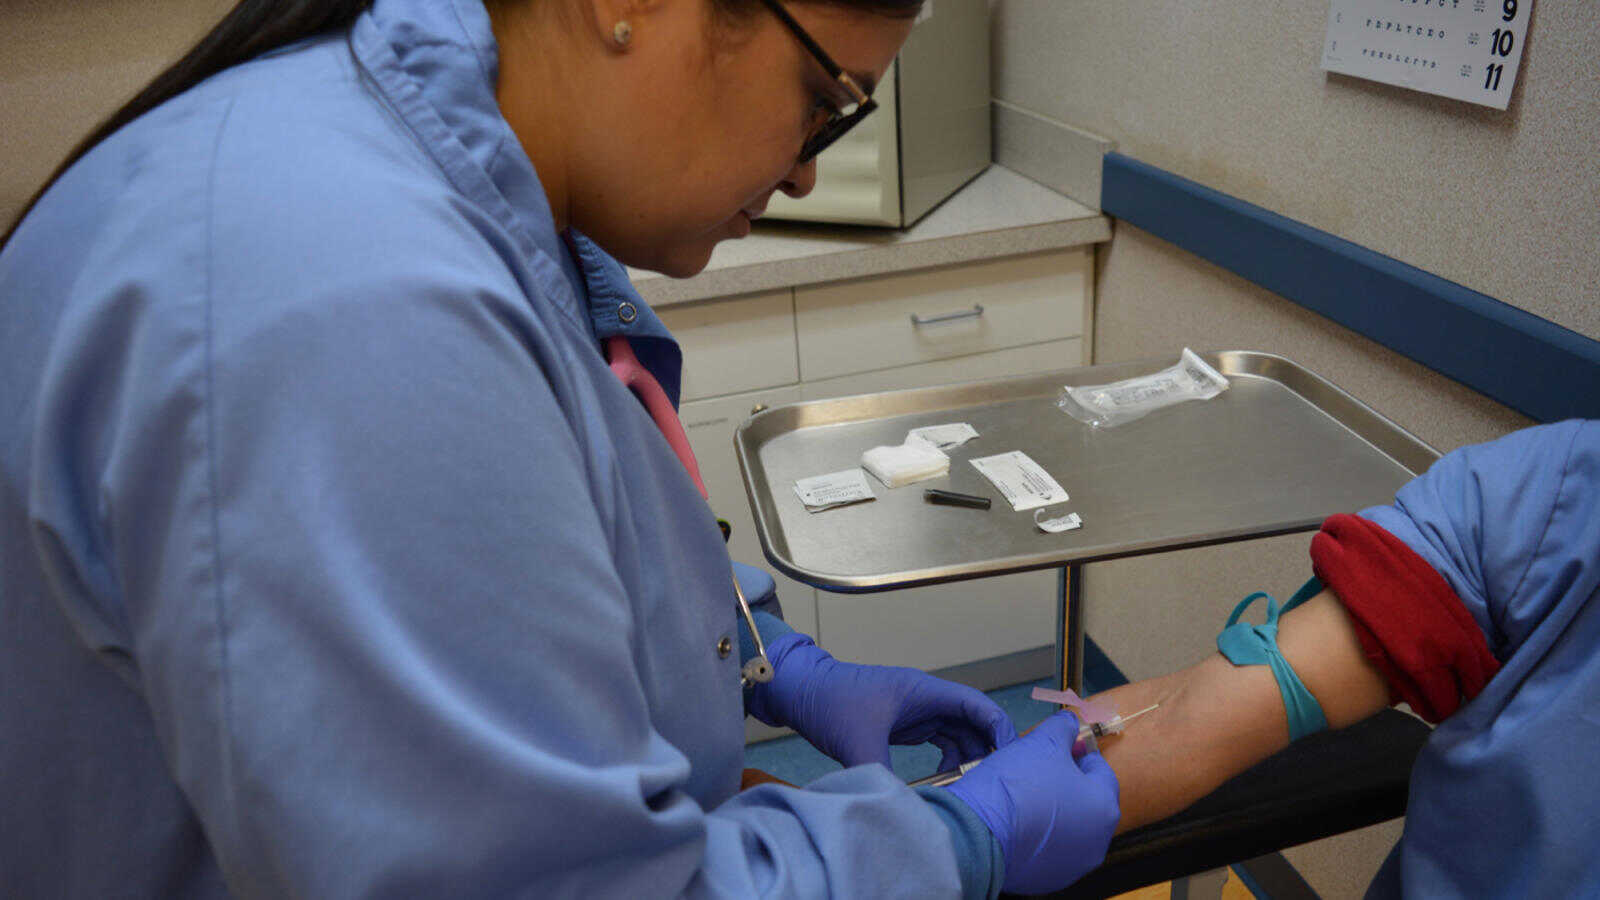 A medical assistant students practices drawing a blood specimen for testing